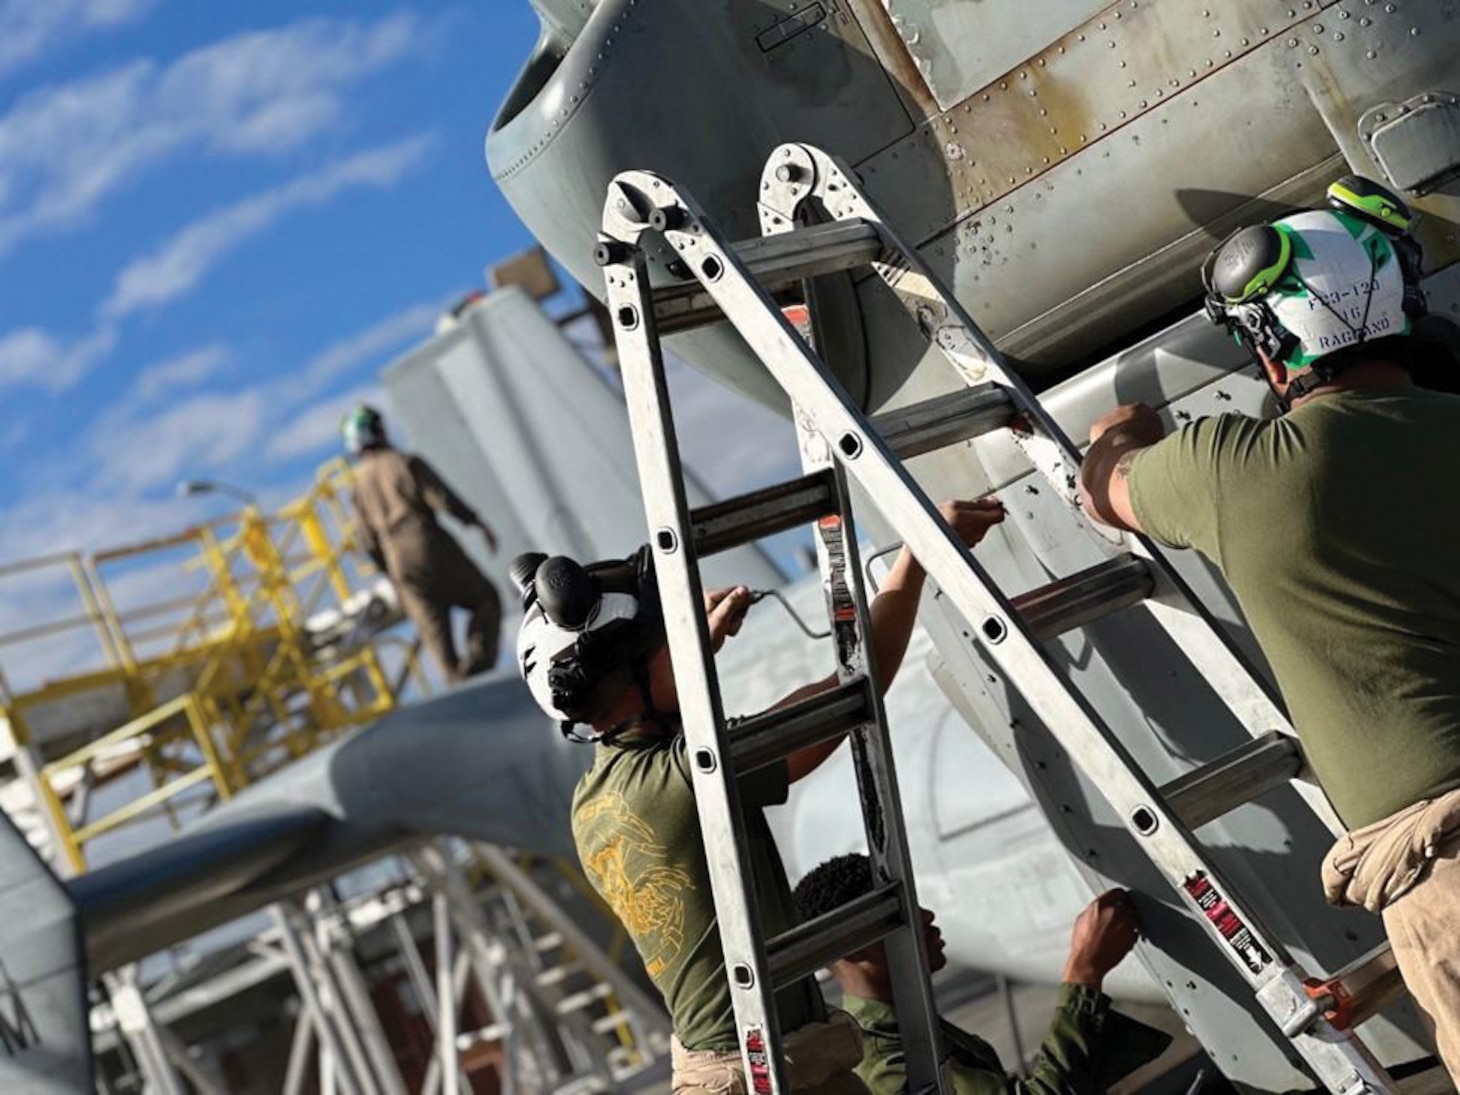 The Naval Aircrew Systems Program Office is fielding new headgear, the Head Gear Unit Number 98/Personal Use (HGU-98P) cranial that improves both head and hearing protection for fleet Marine Corps aviation maintainers. Pictured are two aviation maintainers at Marine Corps Air Station Miramar, California, using the HGU-98P. From left are the HGU-98 X5 and the HGU-98 X4.